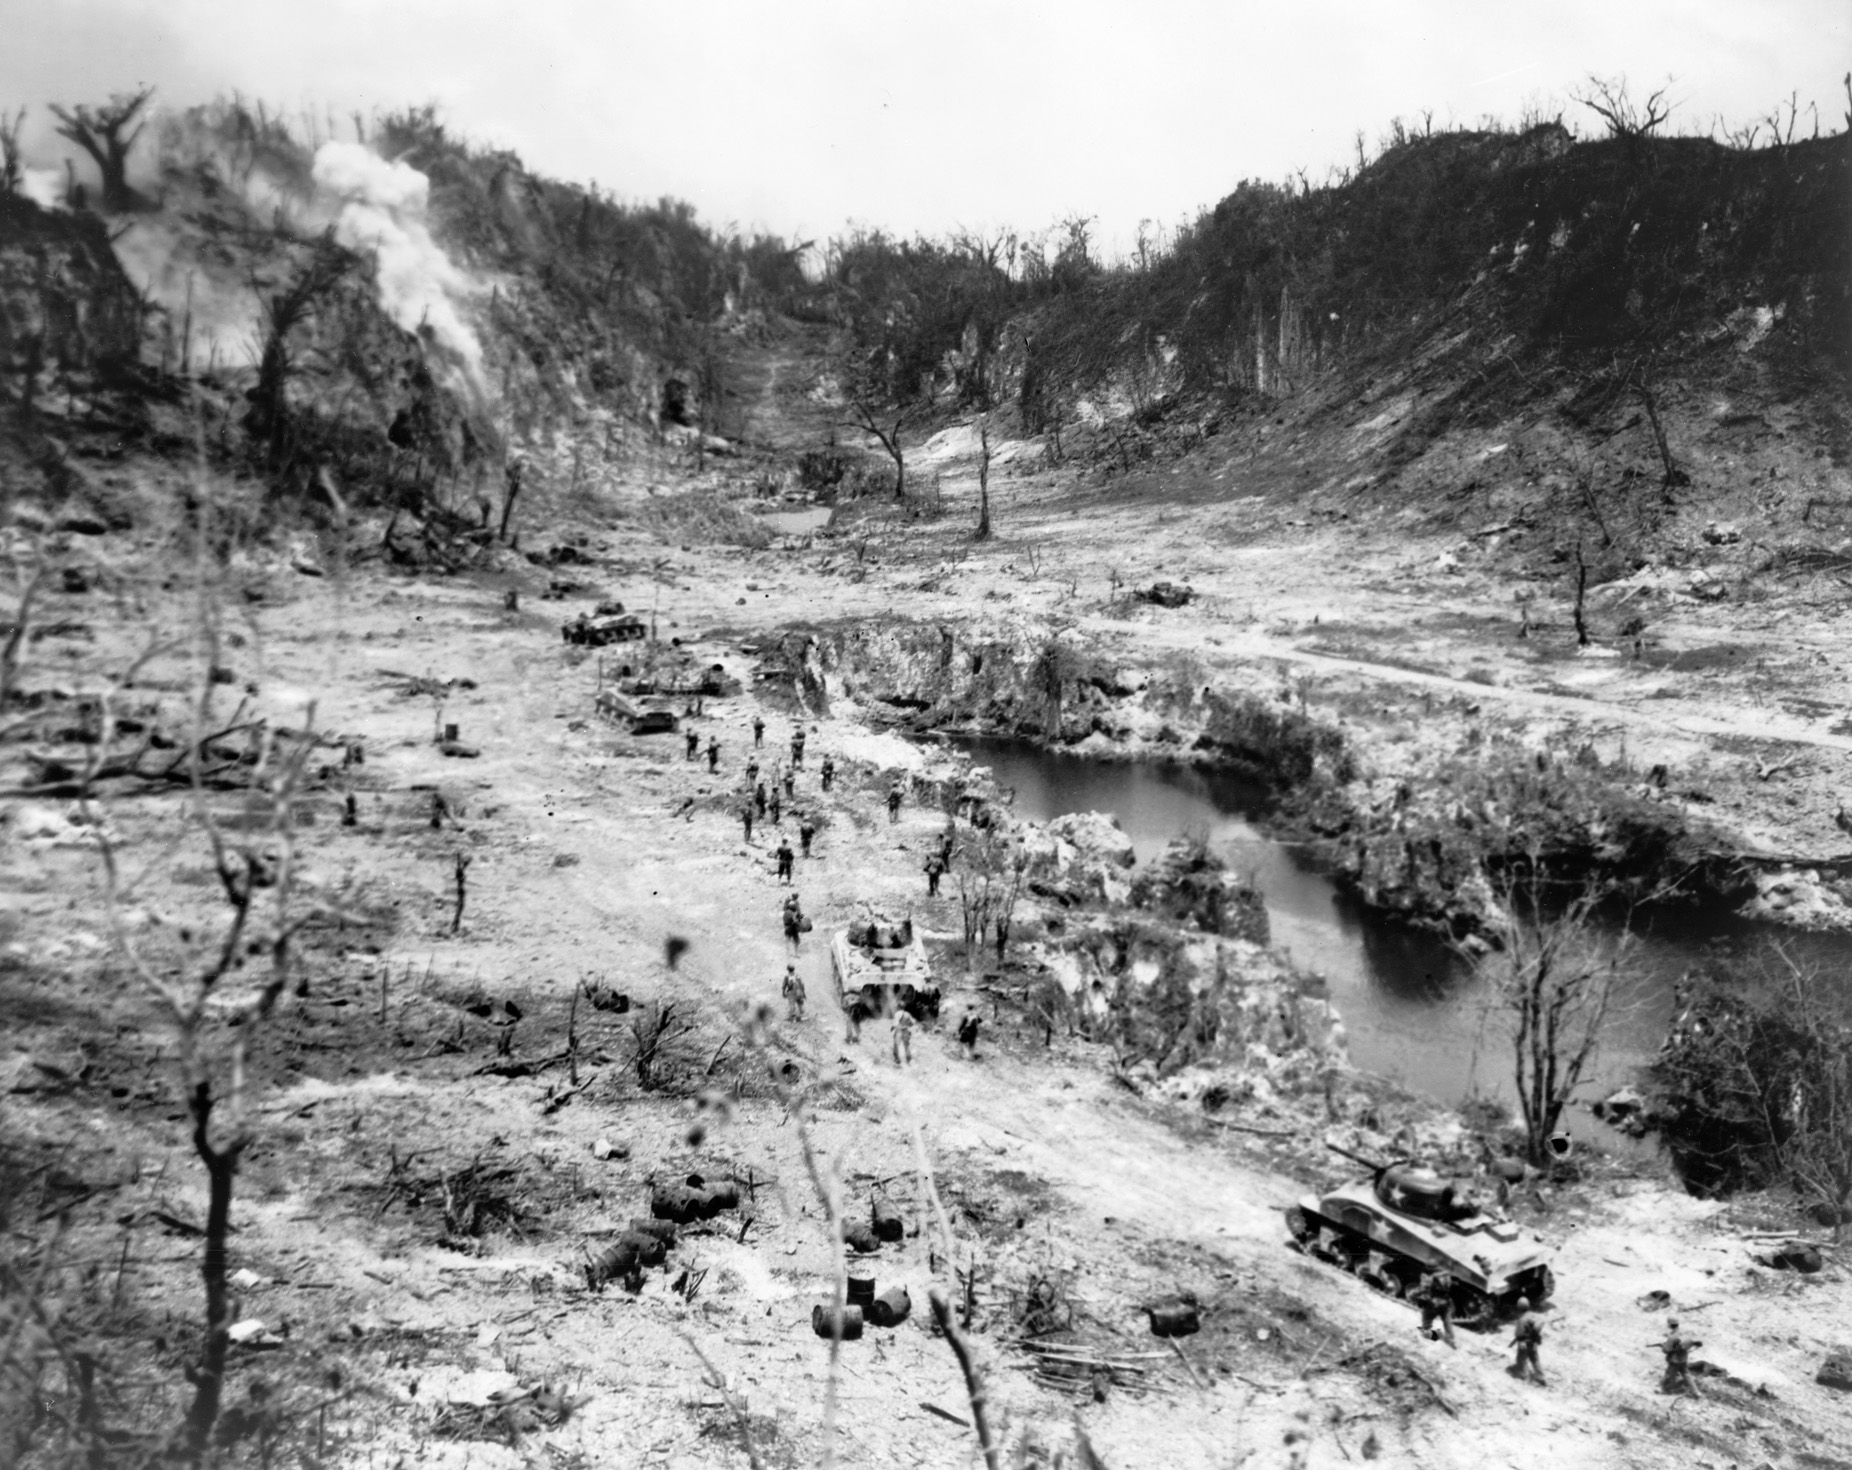 Marine artillery saturates the mouths of caves that the Japanese have fortified, while riflemen attack the positions, often resorting to explosive satchel charges to silence the enemy emplacements and then calling on bulldozers to seal the entrances, entombing the occupants.